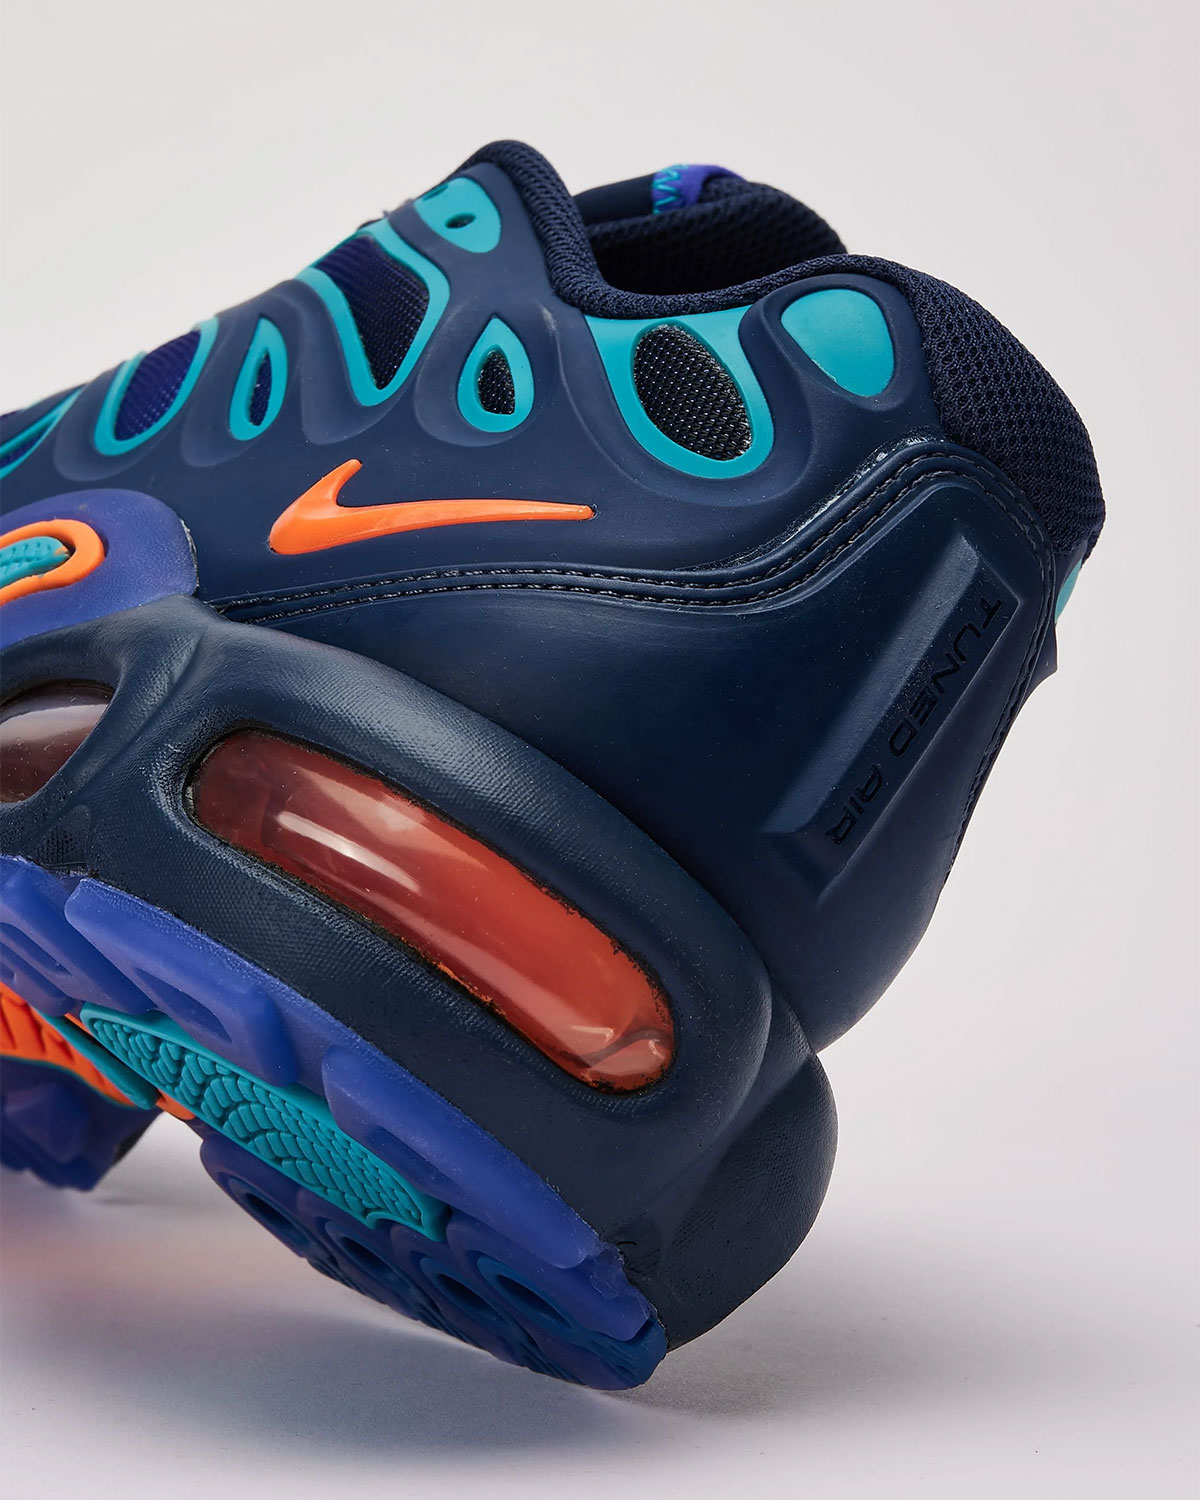 nike shoes with light up soles on boots Plus Drift Midnight Navy Total Orange Dusty Cactus Fd4290 400 5